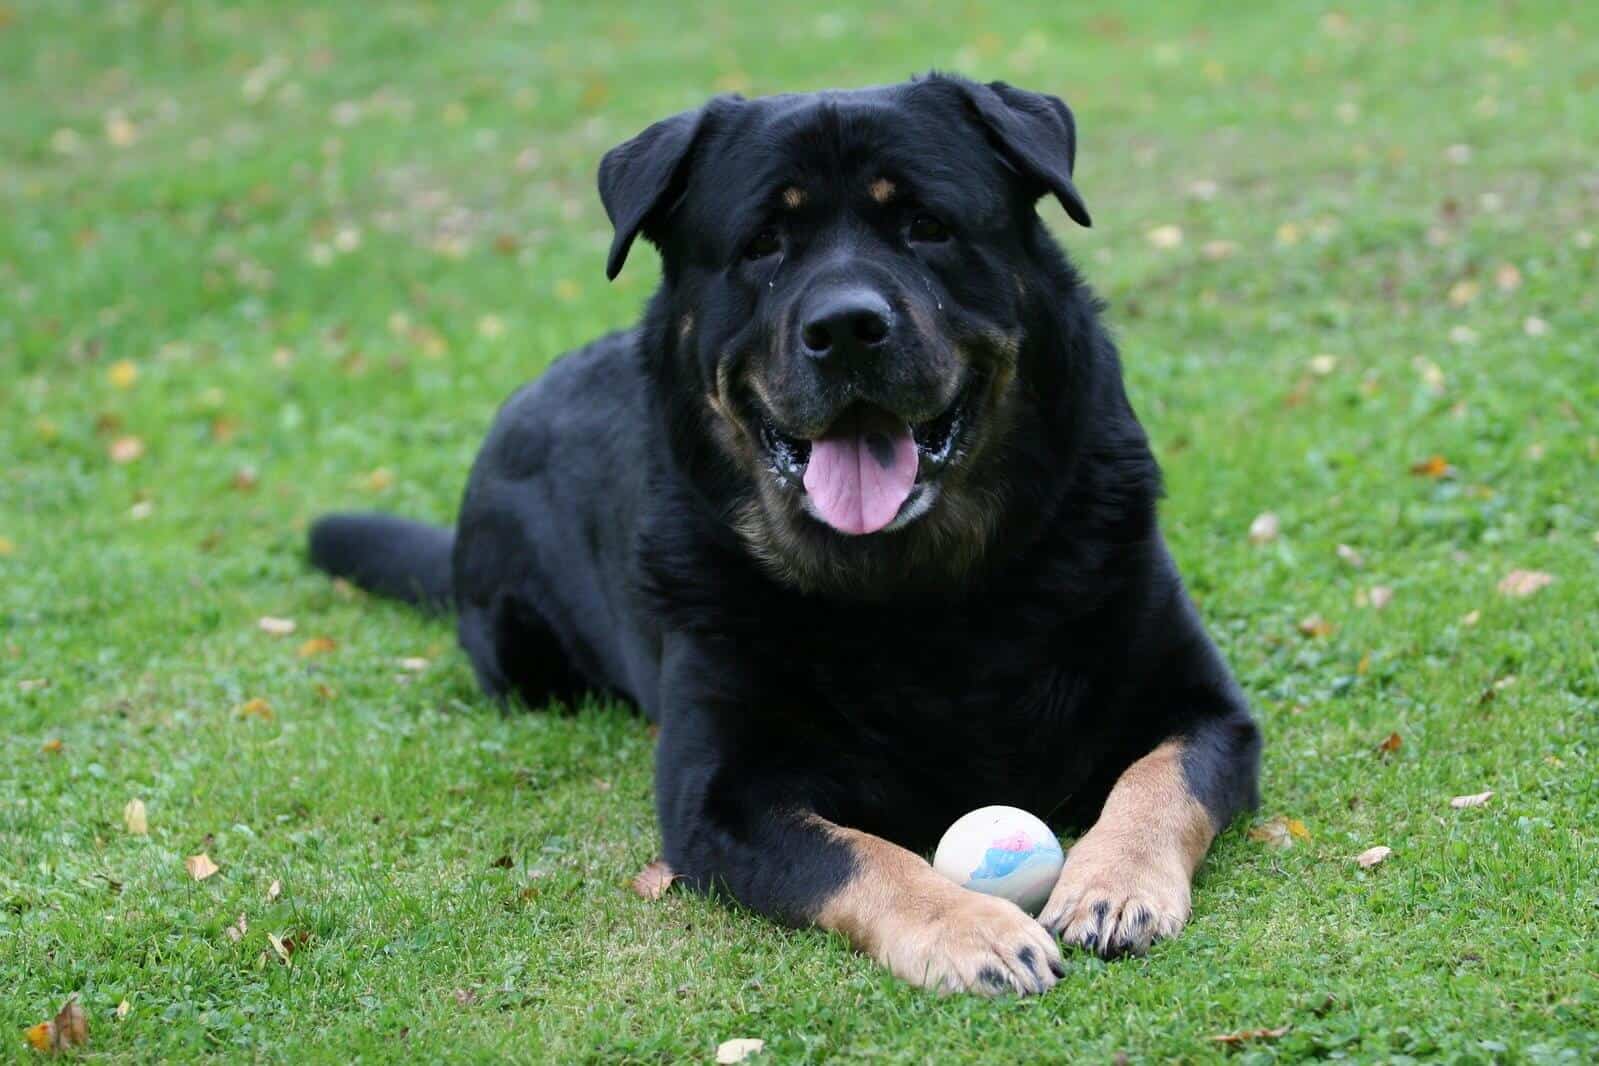 Dog laying on the grass with his mouth open and a ball between his feet